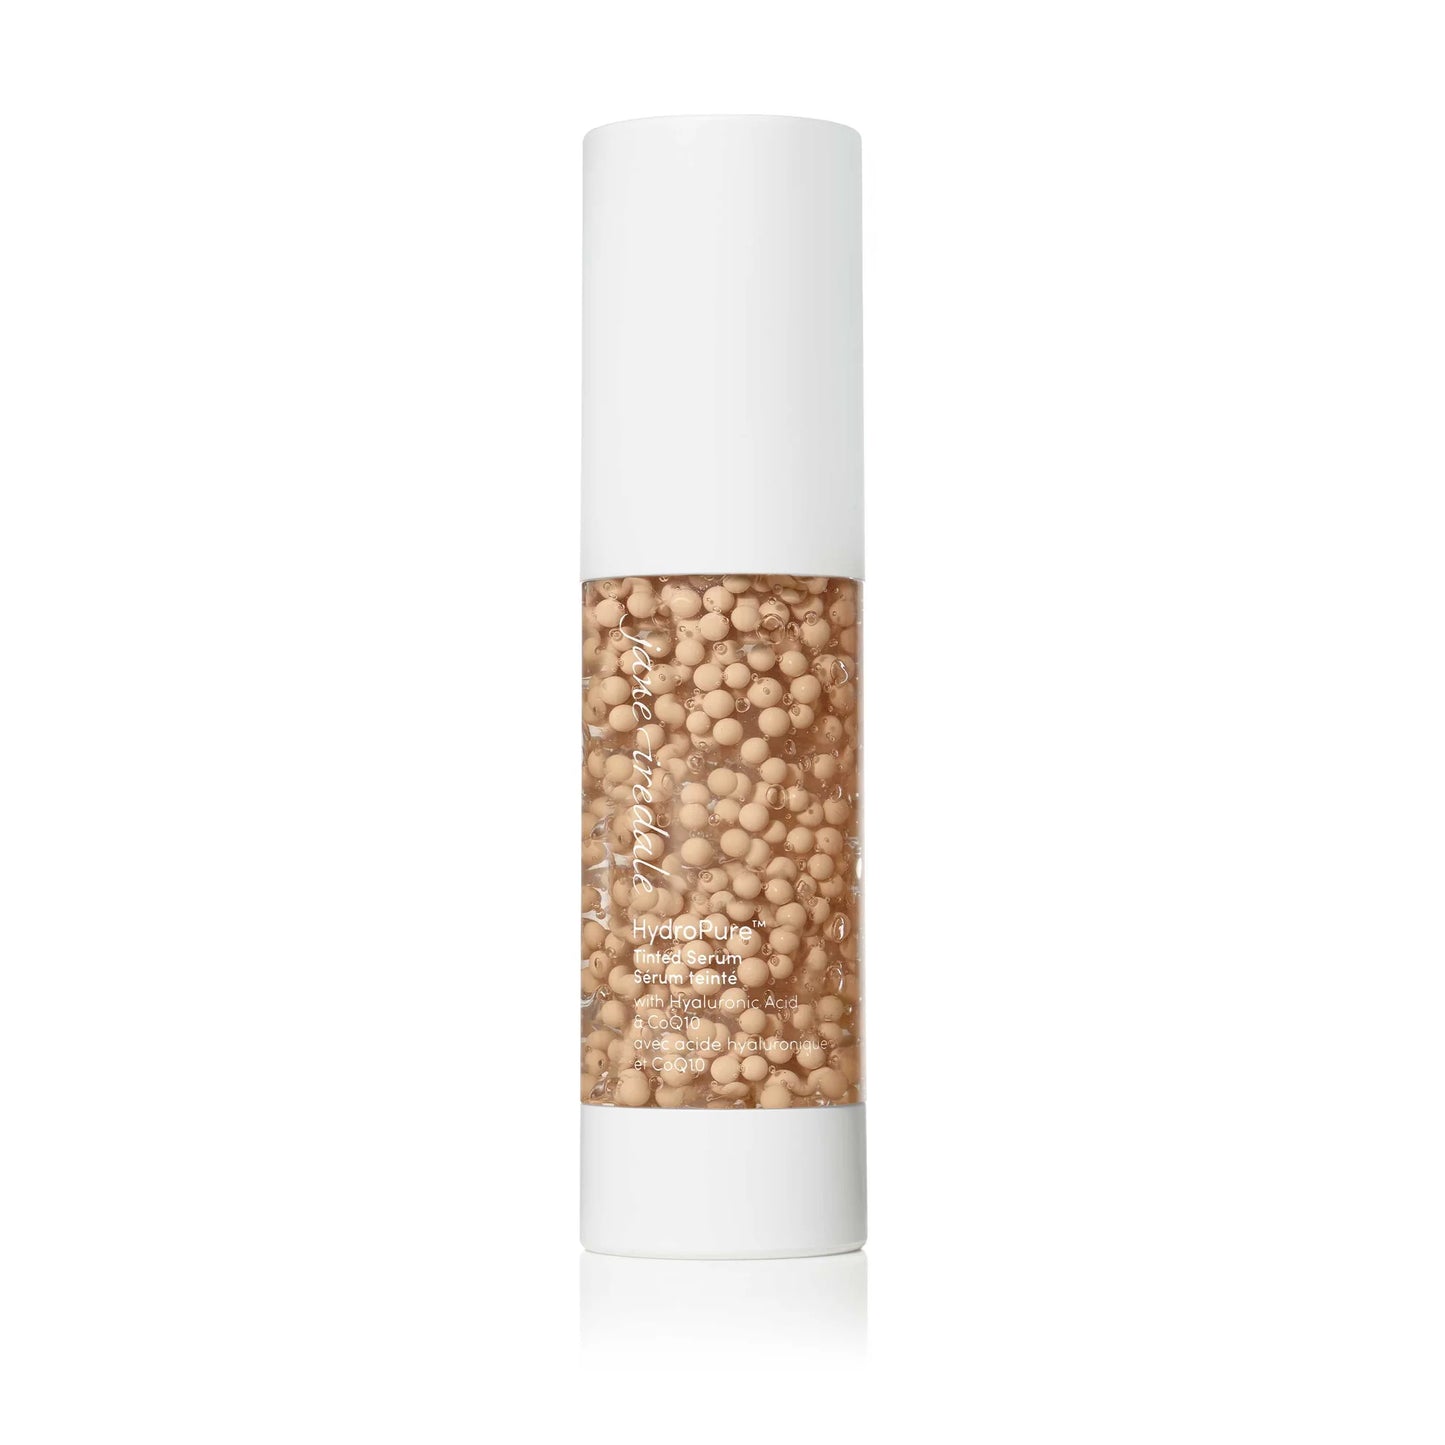 Jane Iredale HydroPure Tinted Serum with Hyaluronic Acid & CoQ10